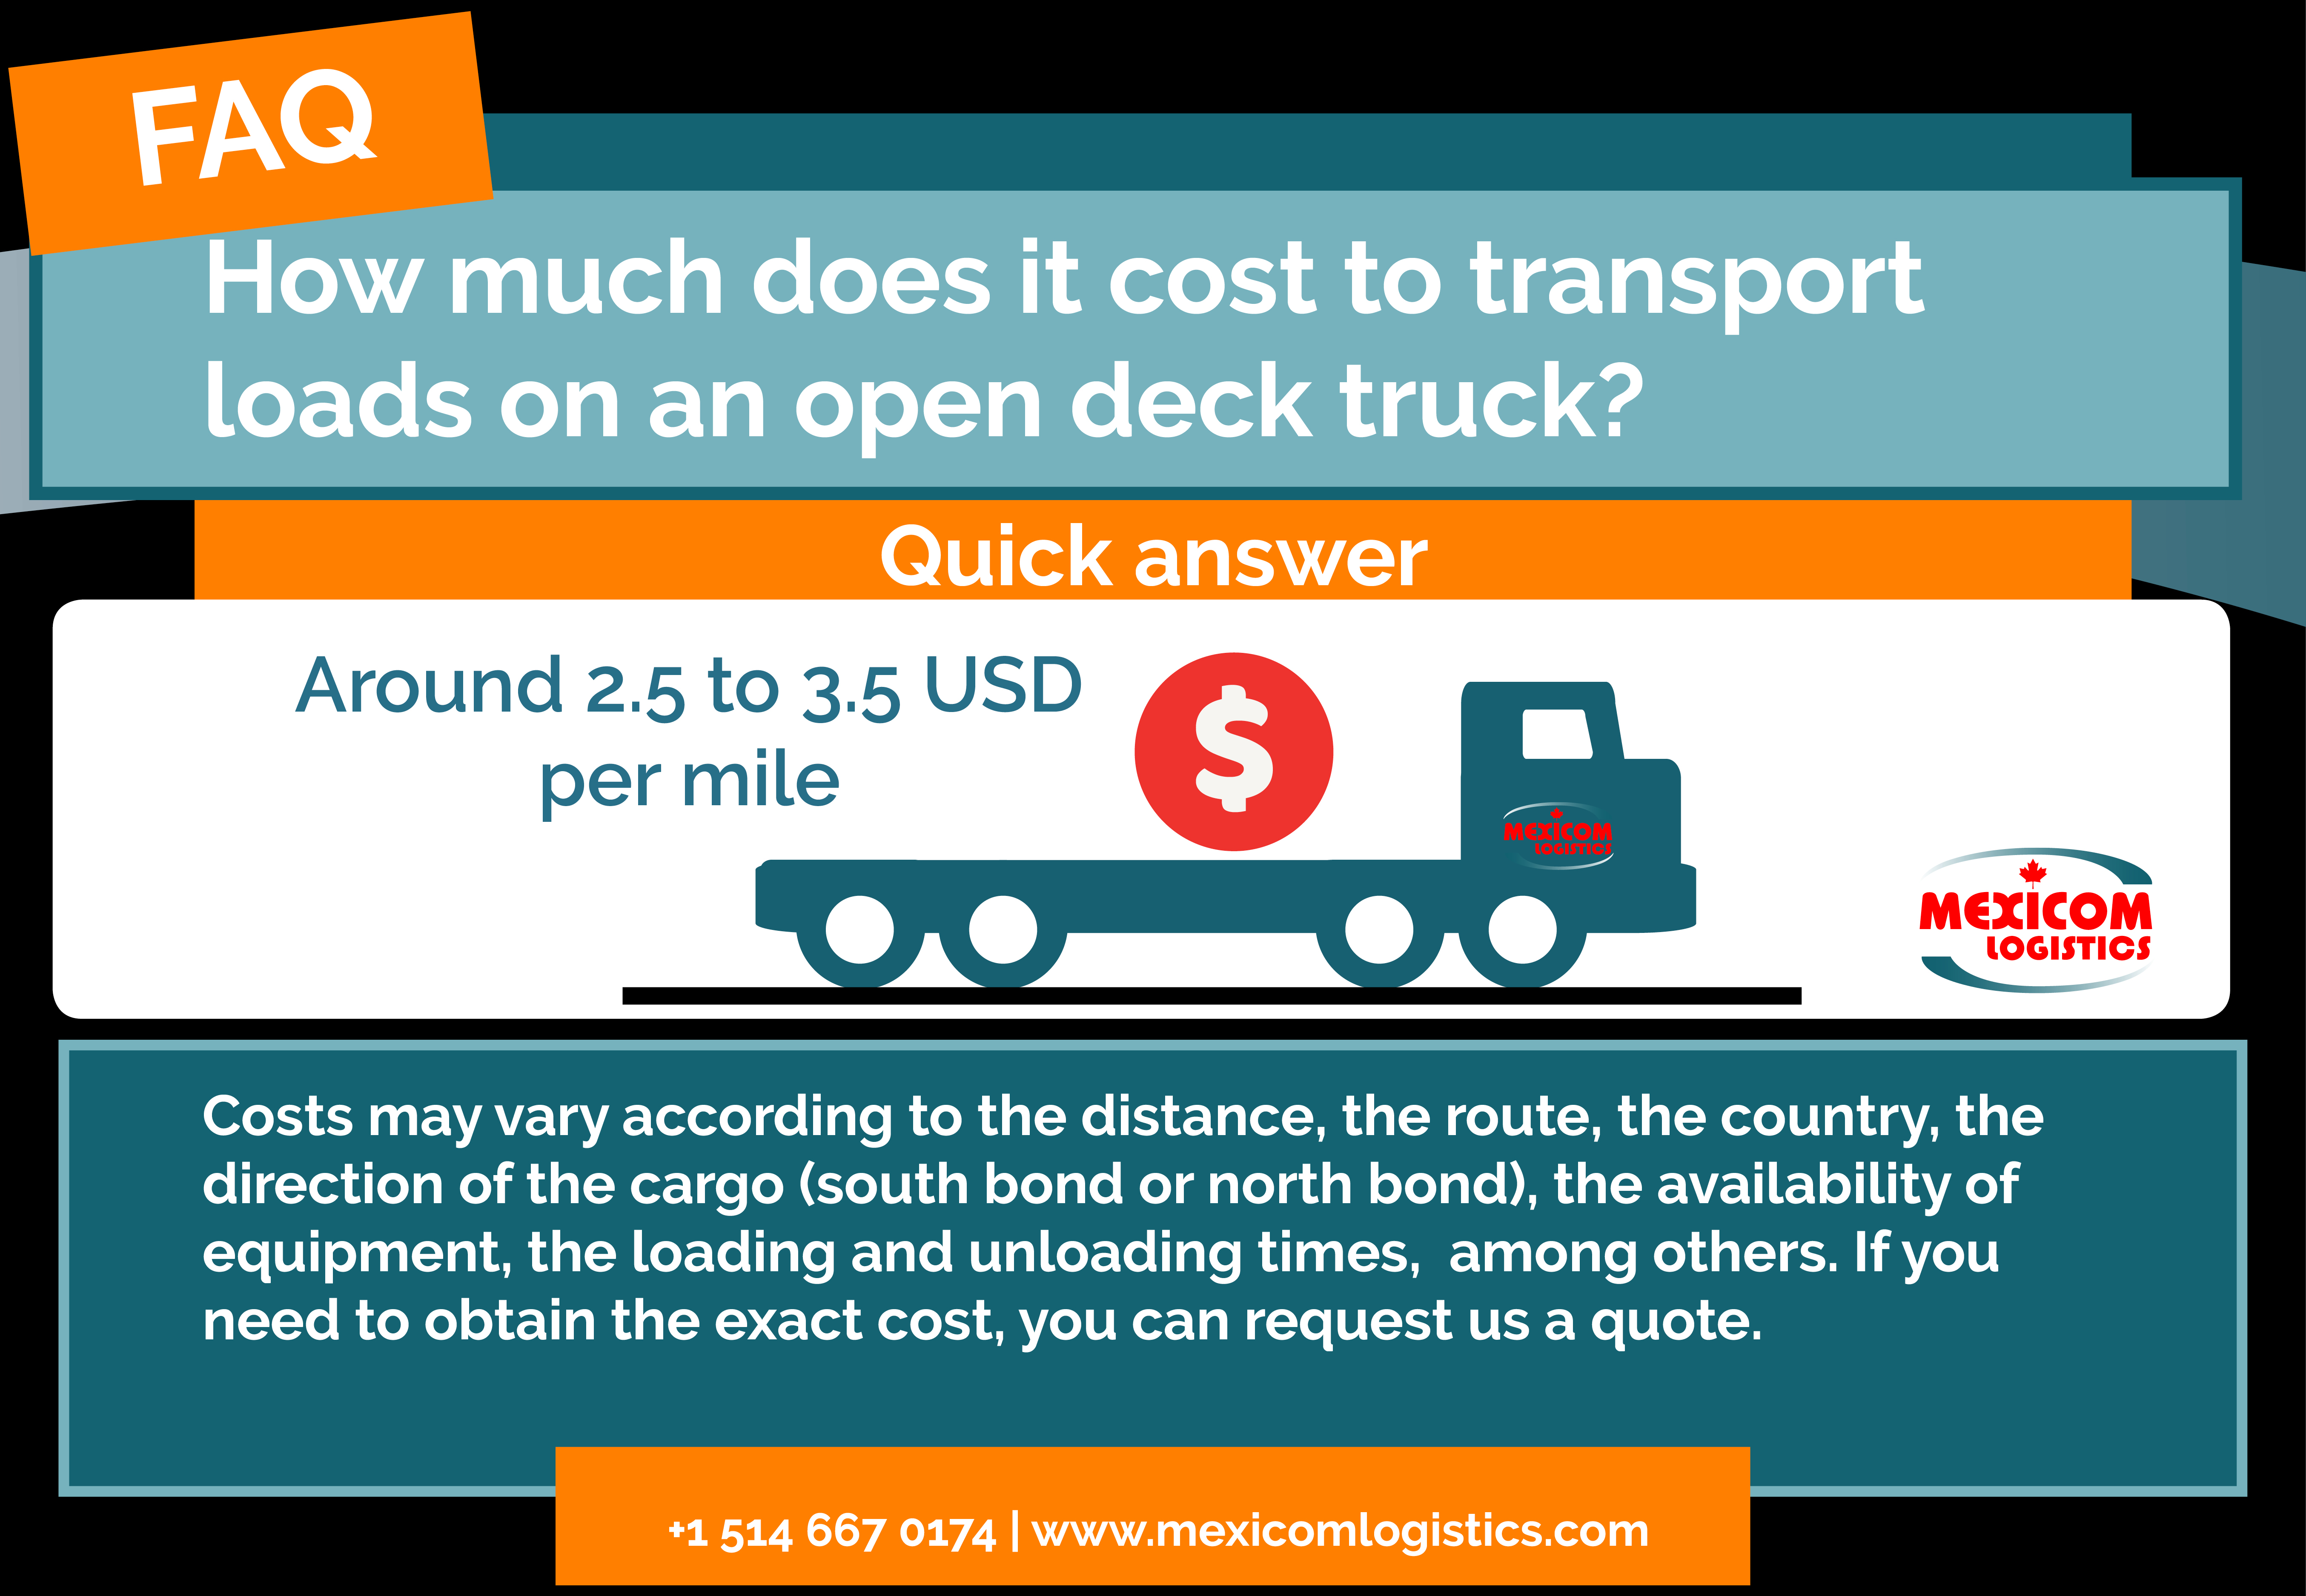 How much does it cost to transport loads on an open deck truck?